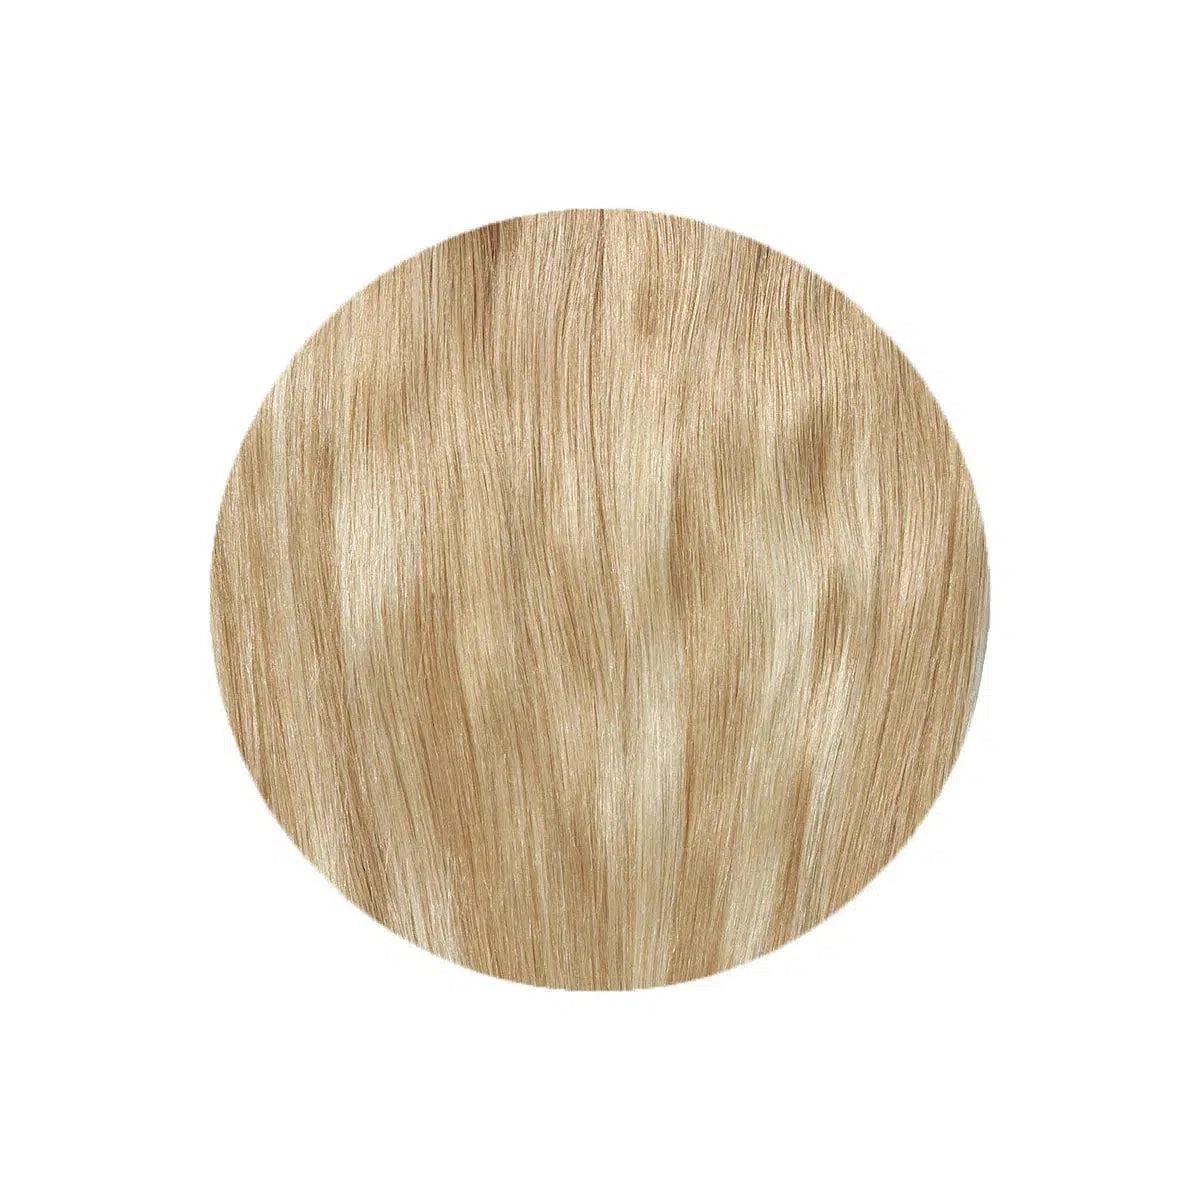 Glam Seamless Beach Wave Invisi Clip Rooted Highlights - RH23/613